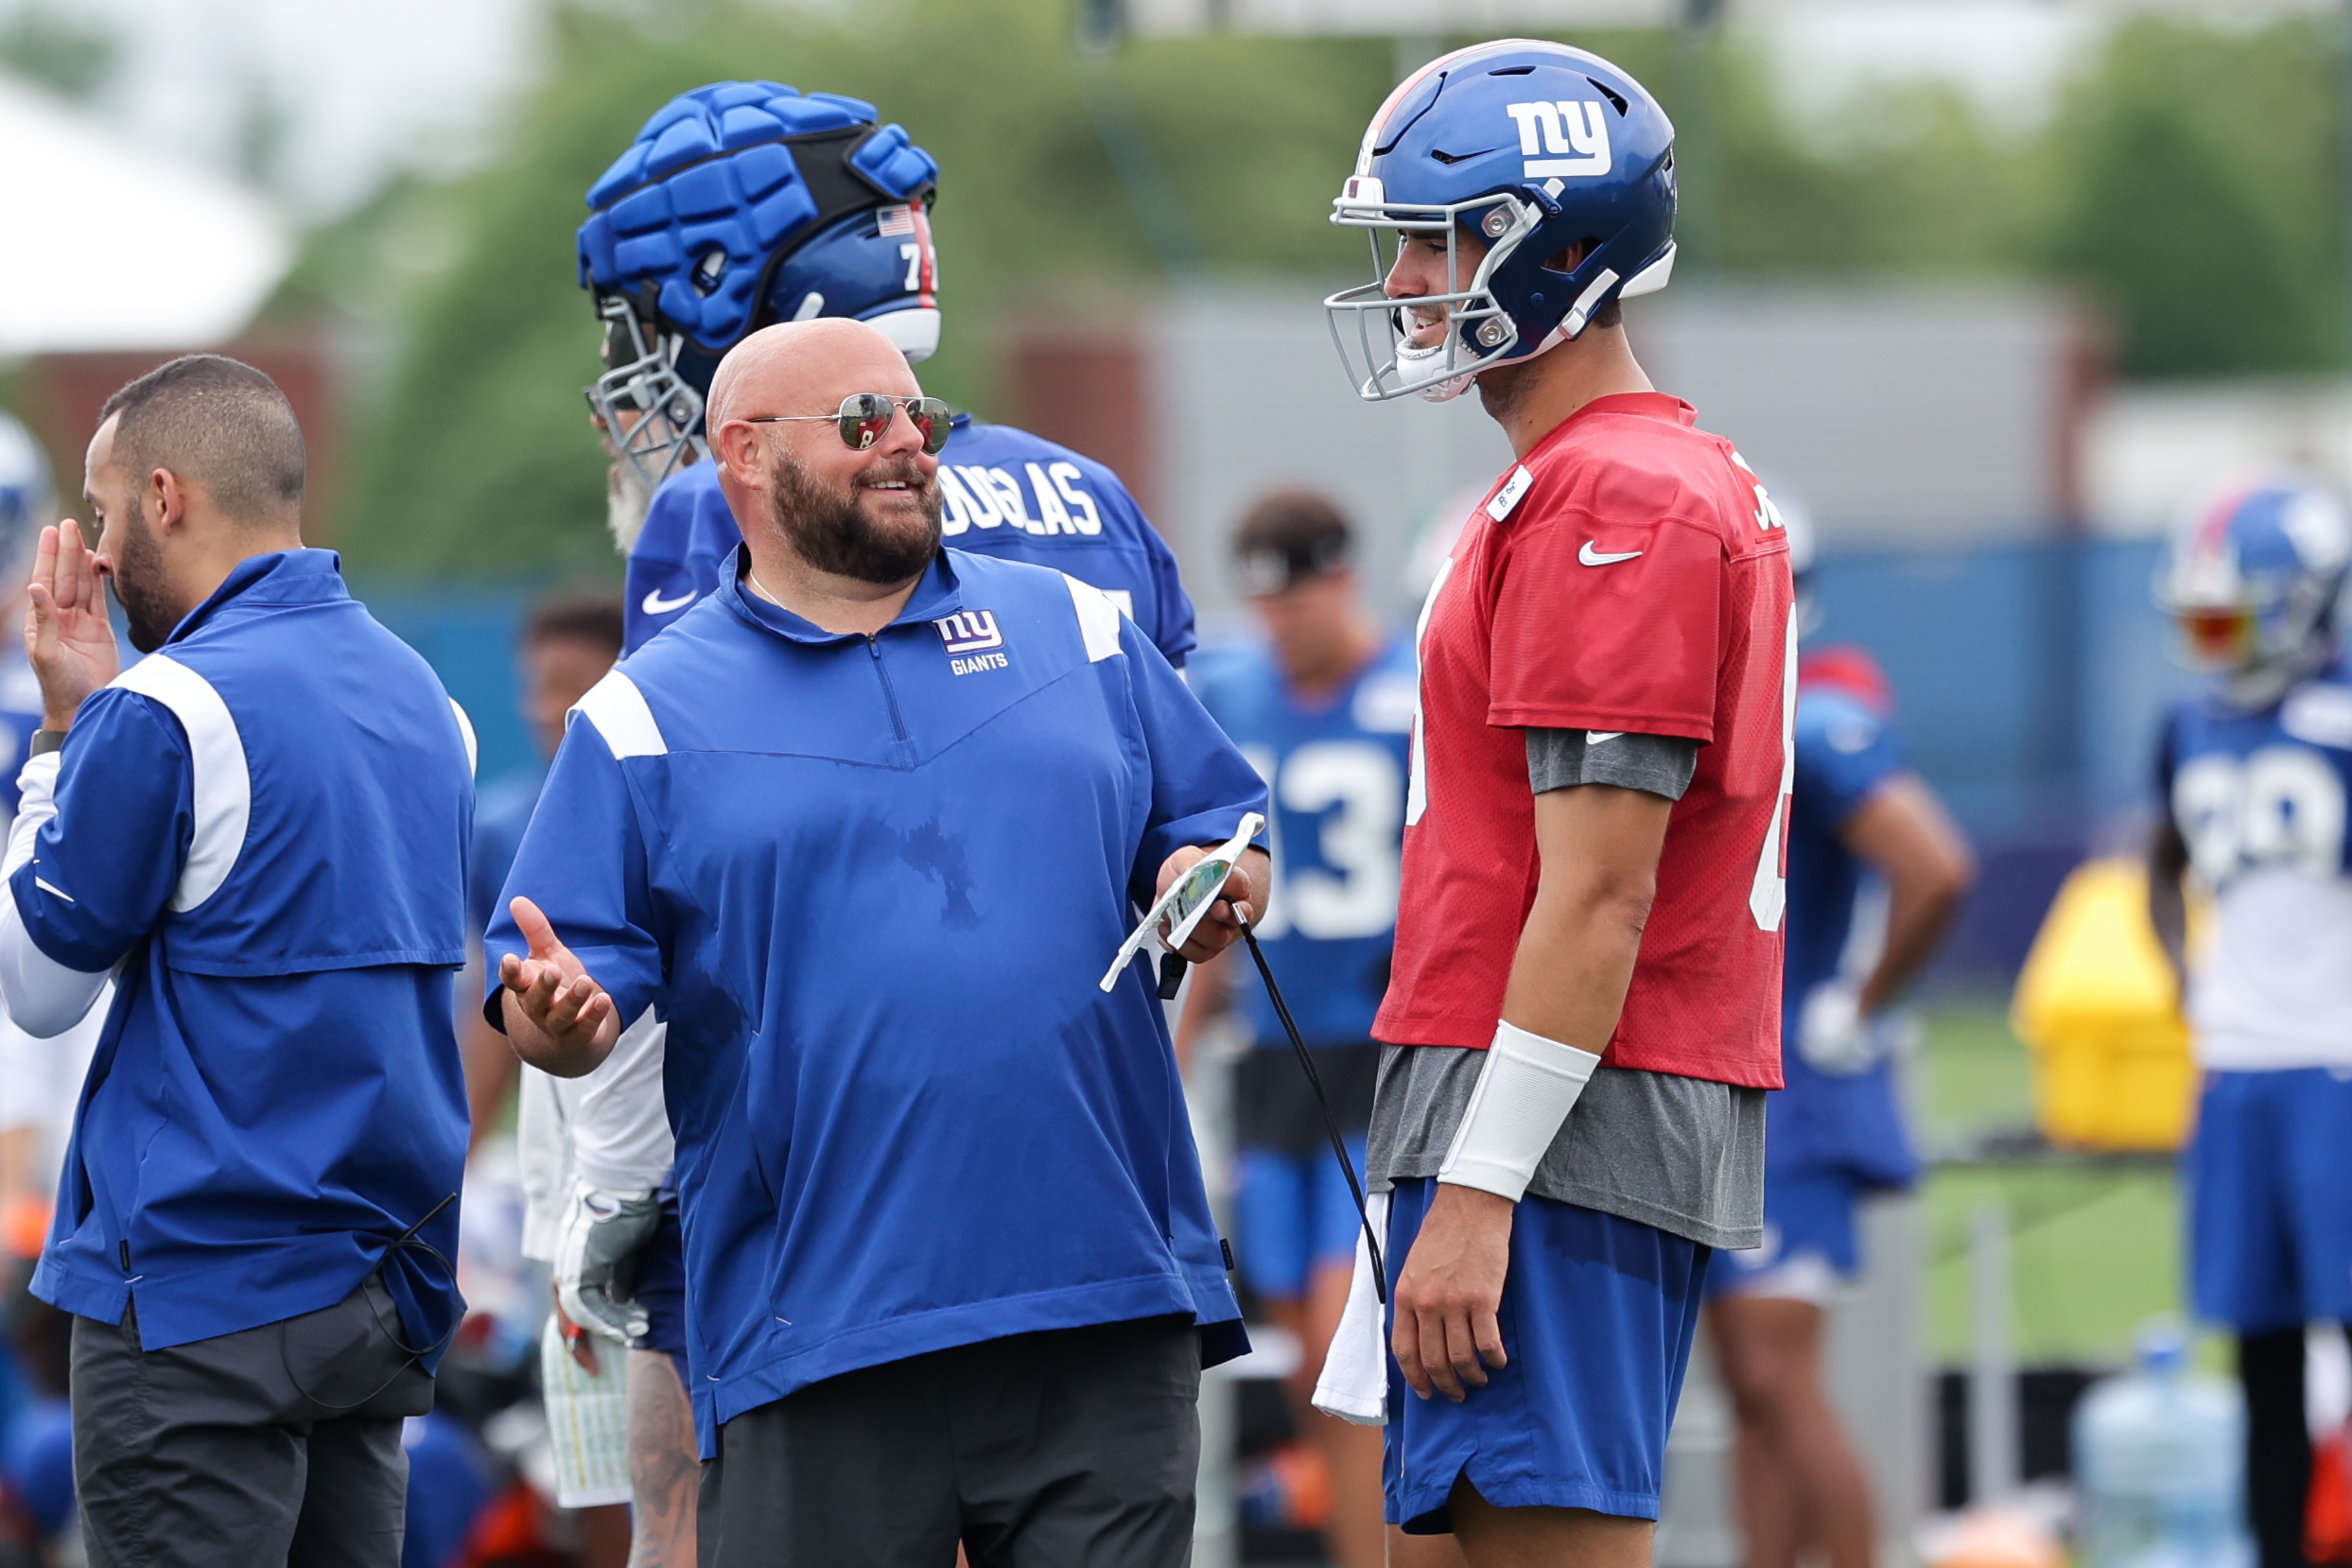 What Do the Giants Have to Prove in the Preseason?